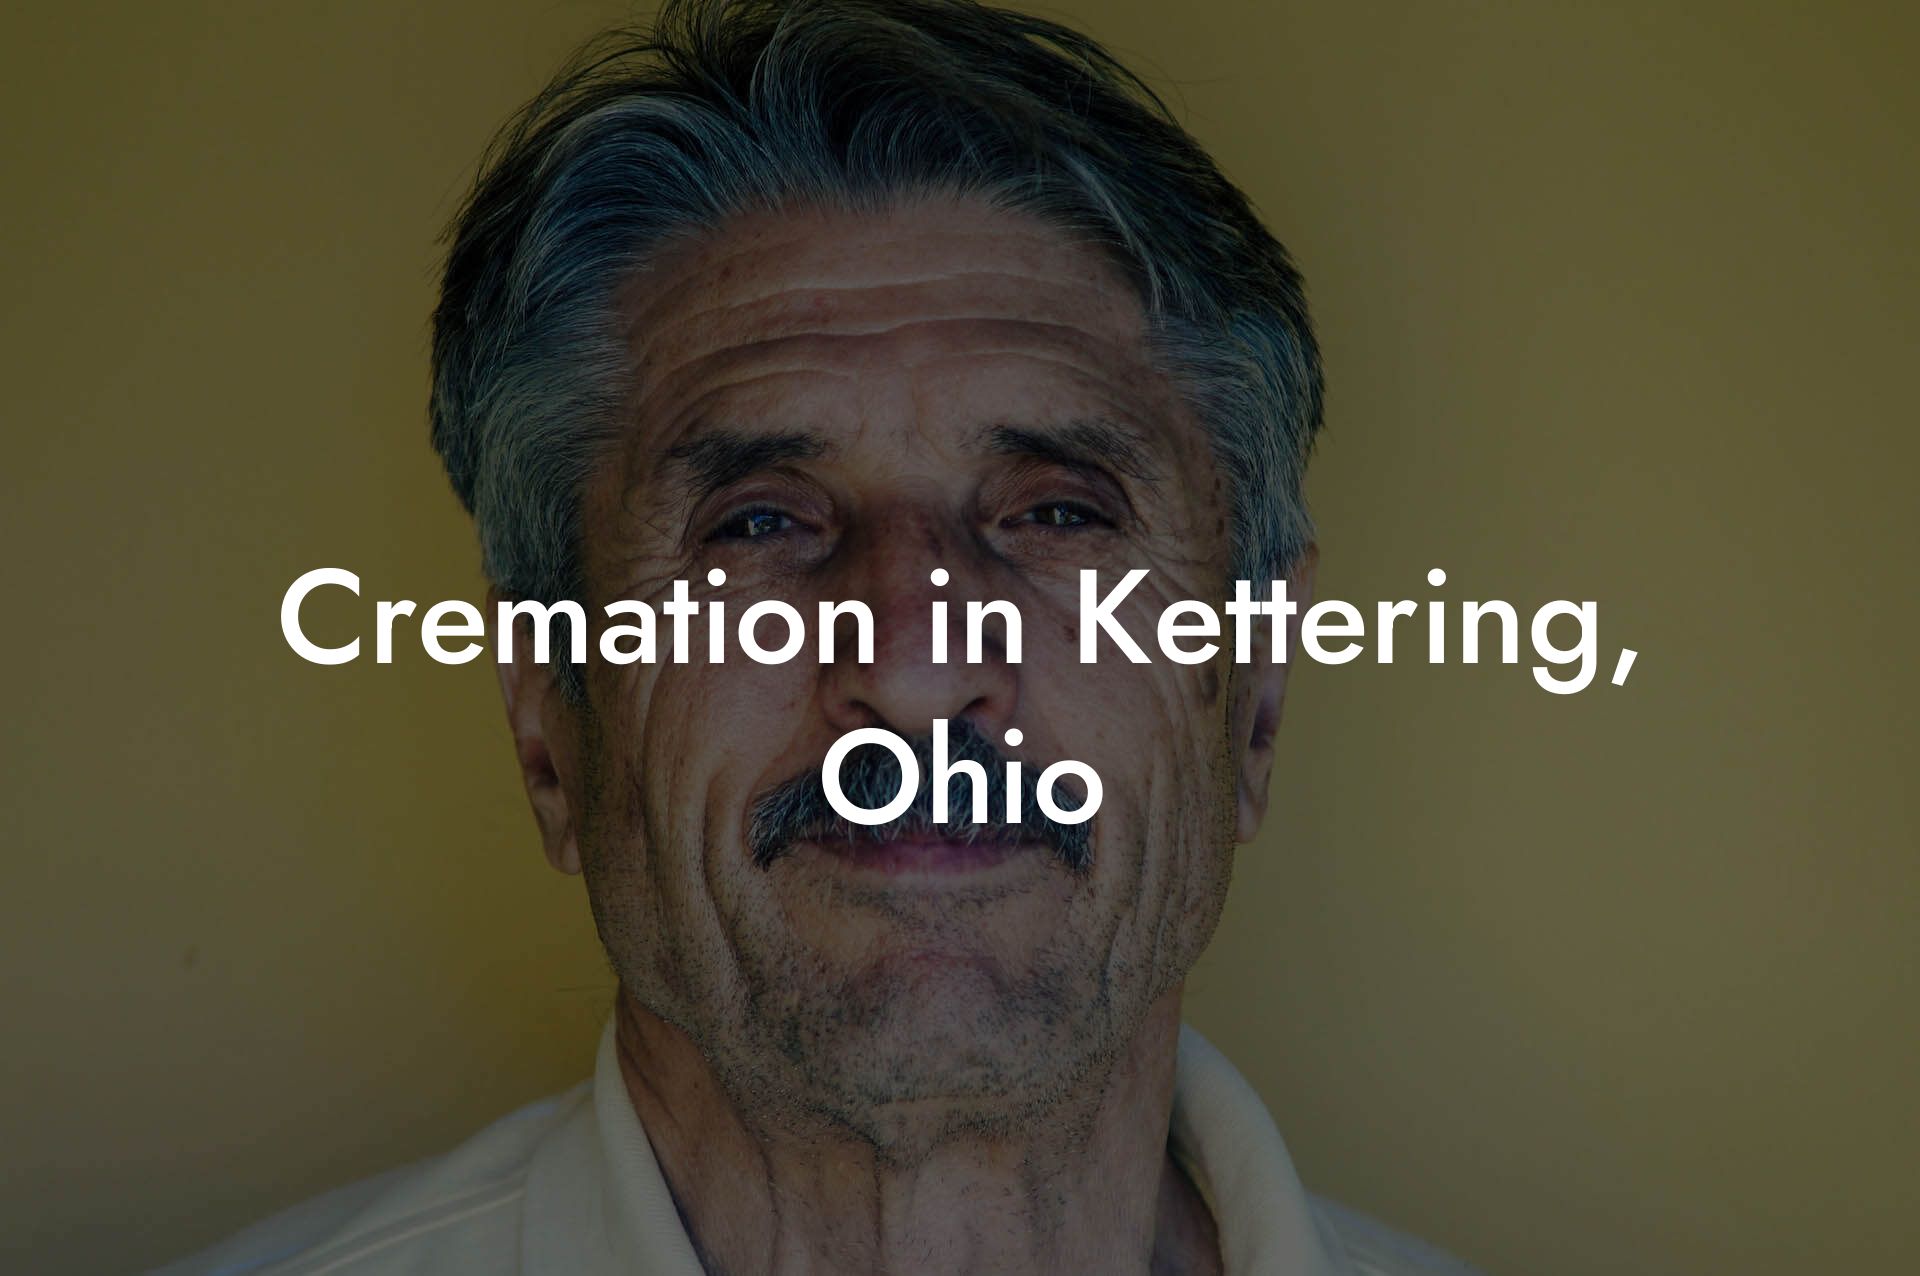 Cremation in Kettering, Ohio